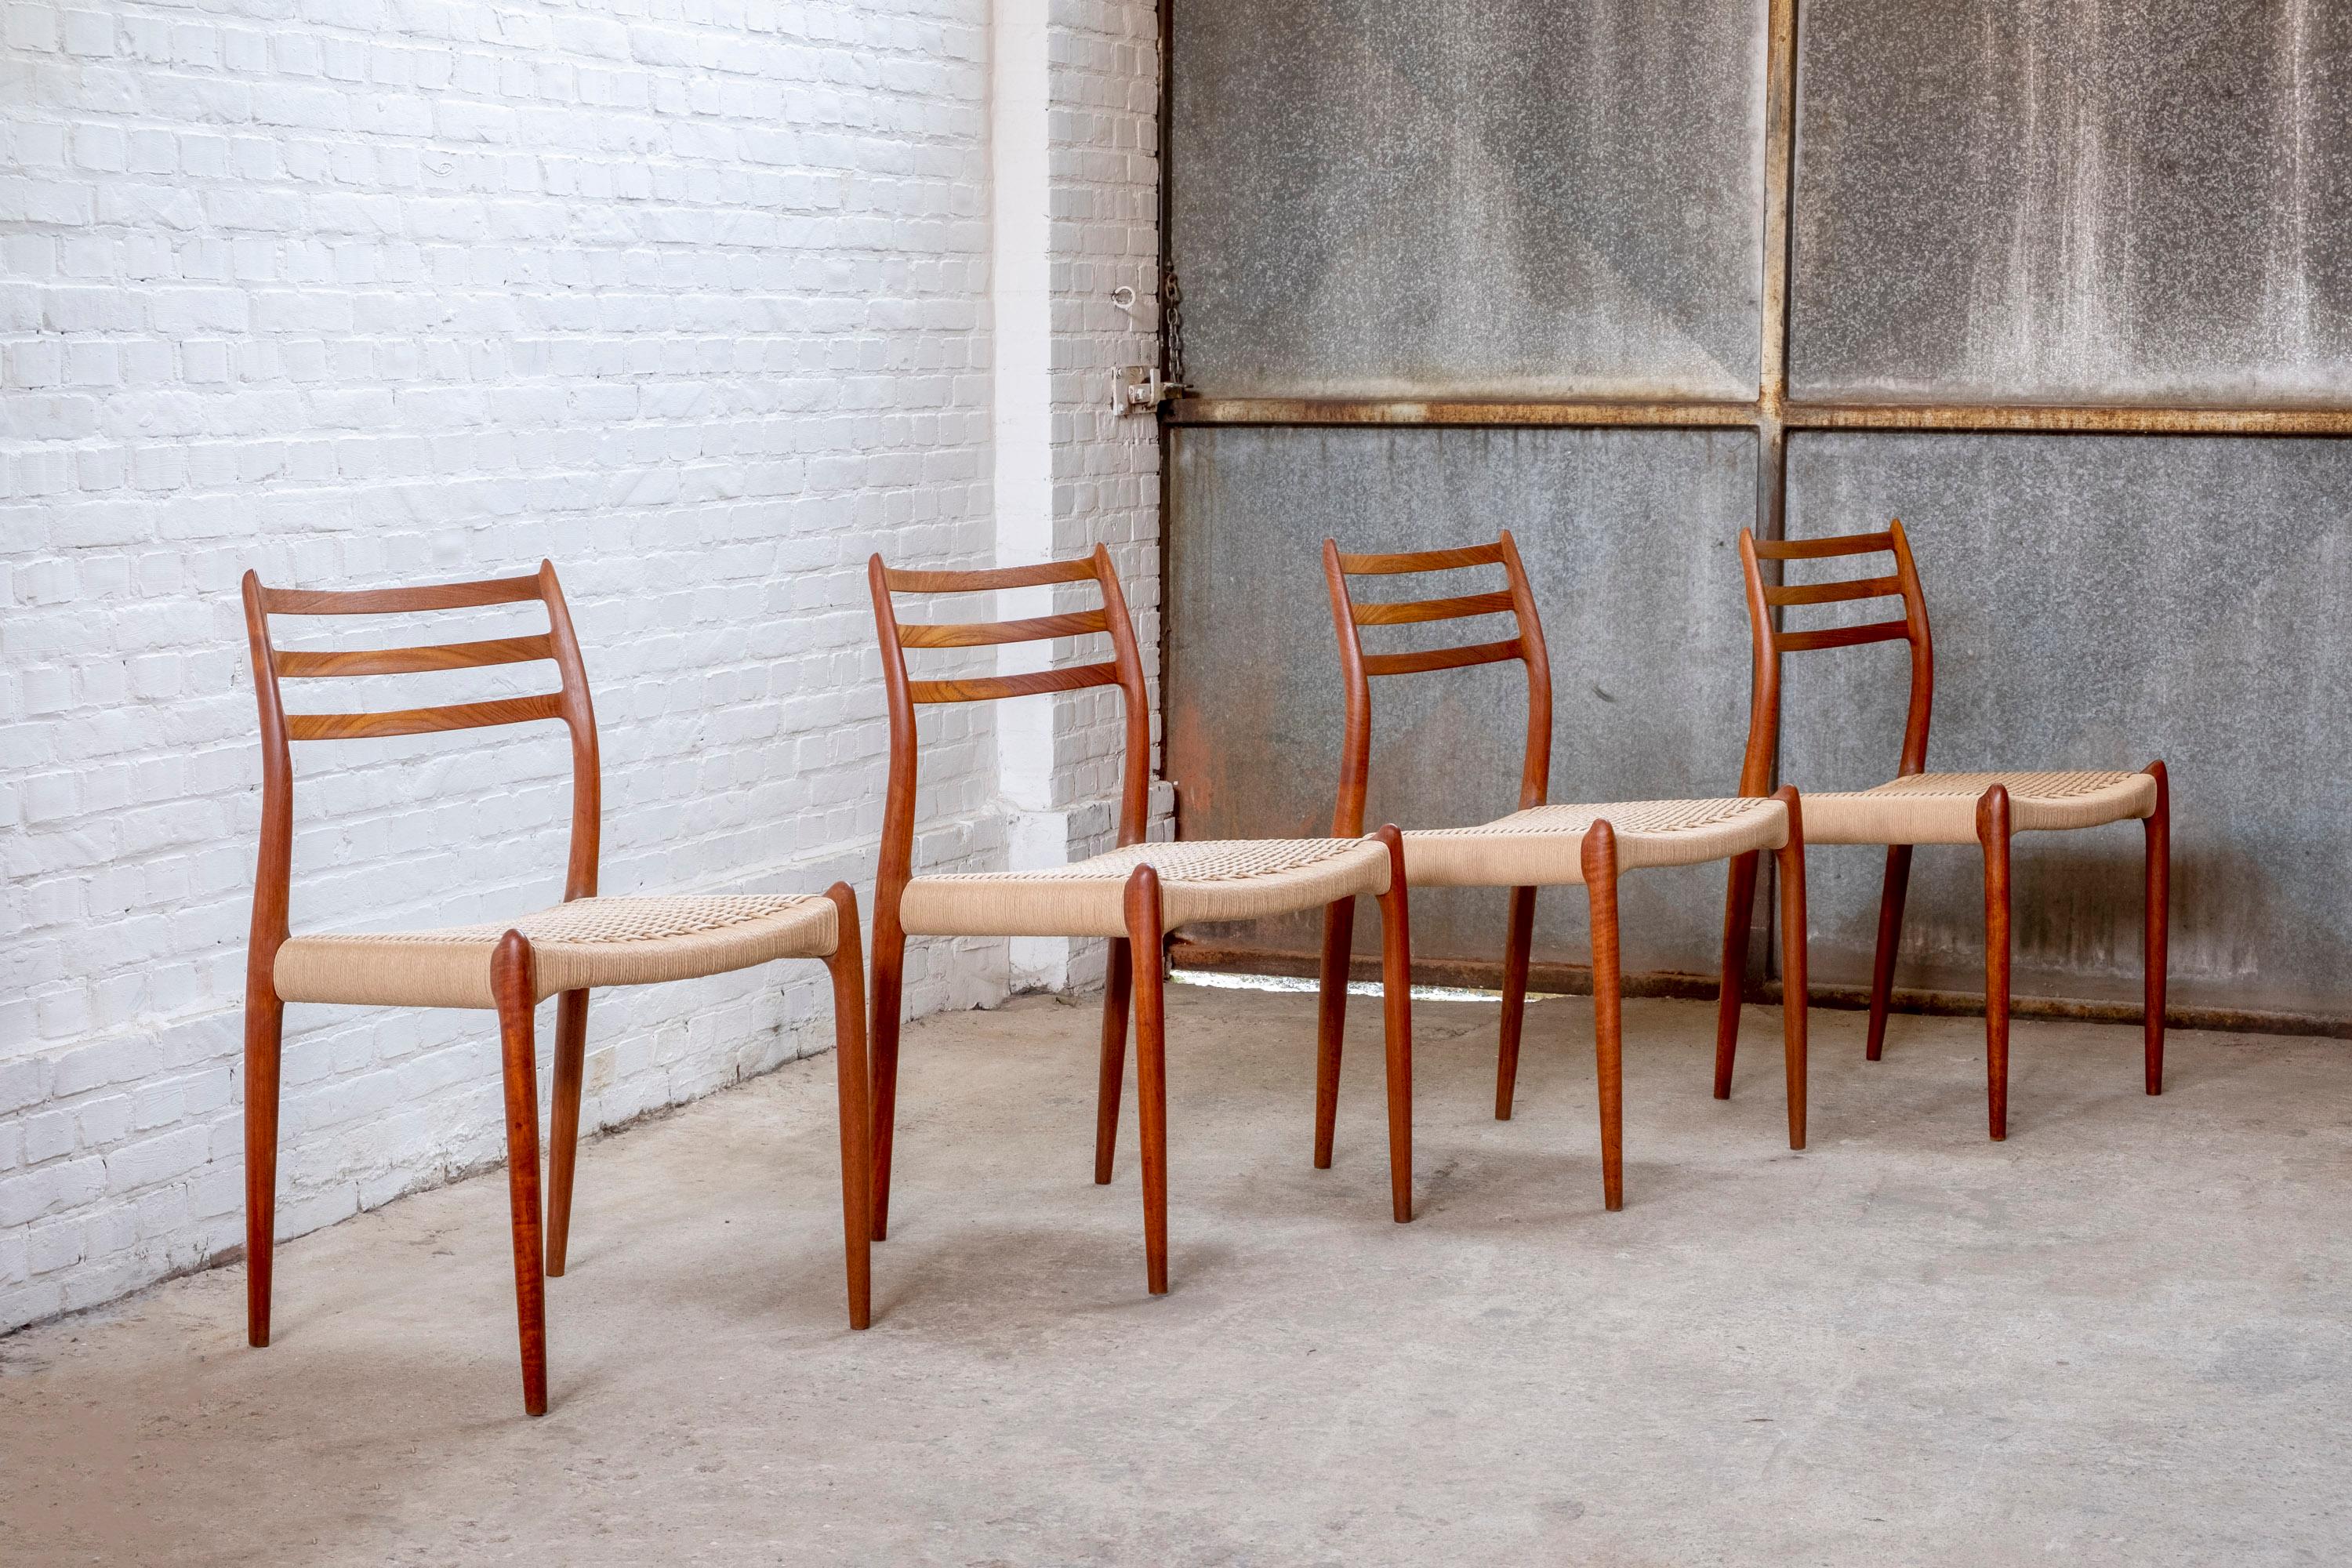 Stunning set of 4 dining chairs by Niels Otto Møller, Model 78 in teak, designed in 1962.
Model 78 is probably the most sophisticated and refined design made by Niels O. Møller.
This set was produced in the 1960s, have all the medaillons from JL